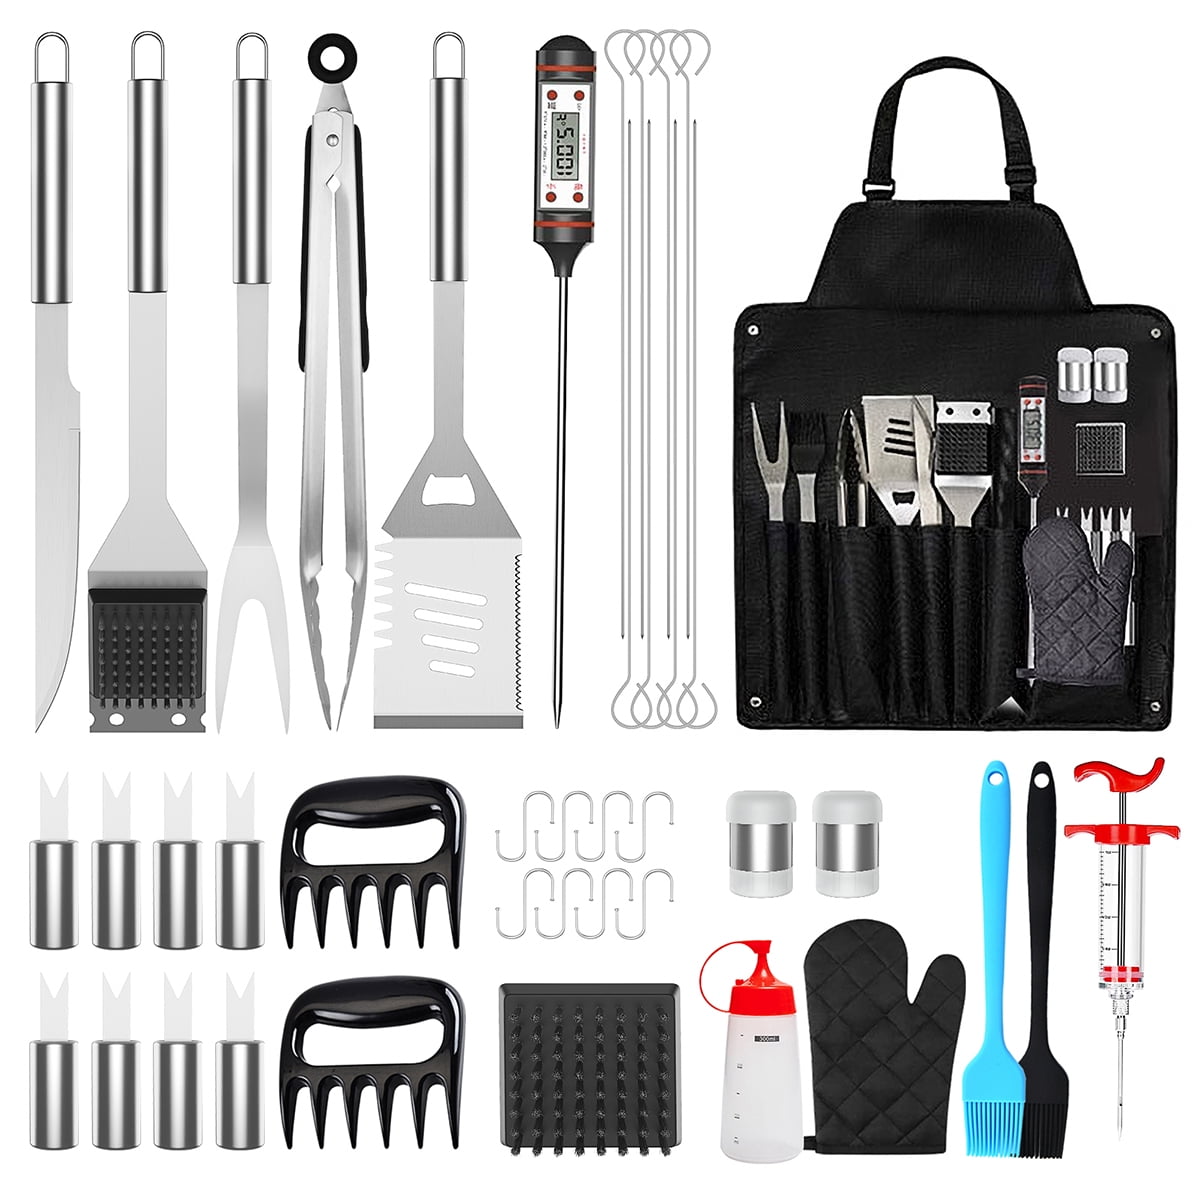 BBQ Grill Accessories,41PCS BBQ Tool Set, ExtraThick Stainless Steel  Barbecue Utensils Cleaning Brush,Shovel Fork BBQ Accessories With Storage  Bag for Camping Birthday Party on the Best bbq Set Gift 